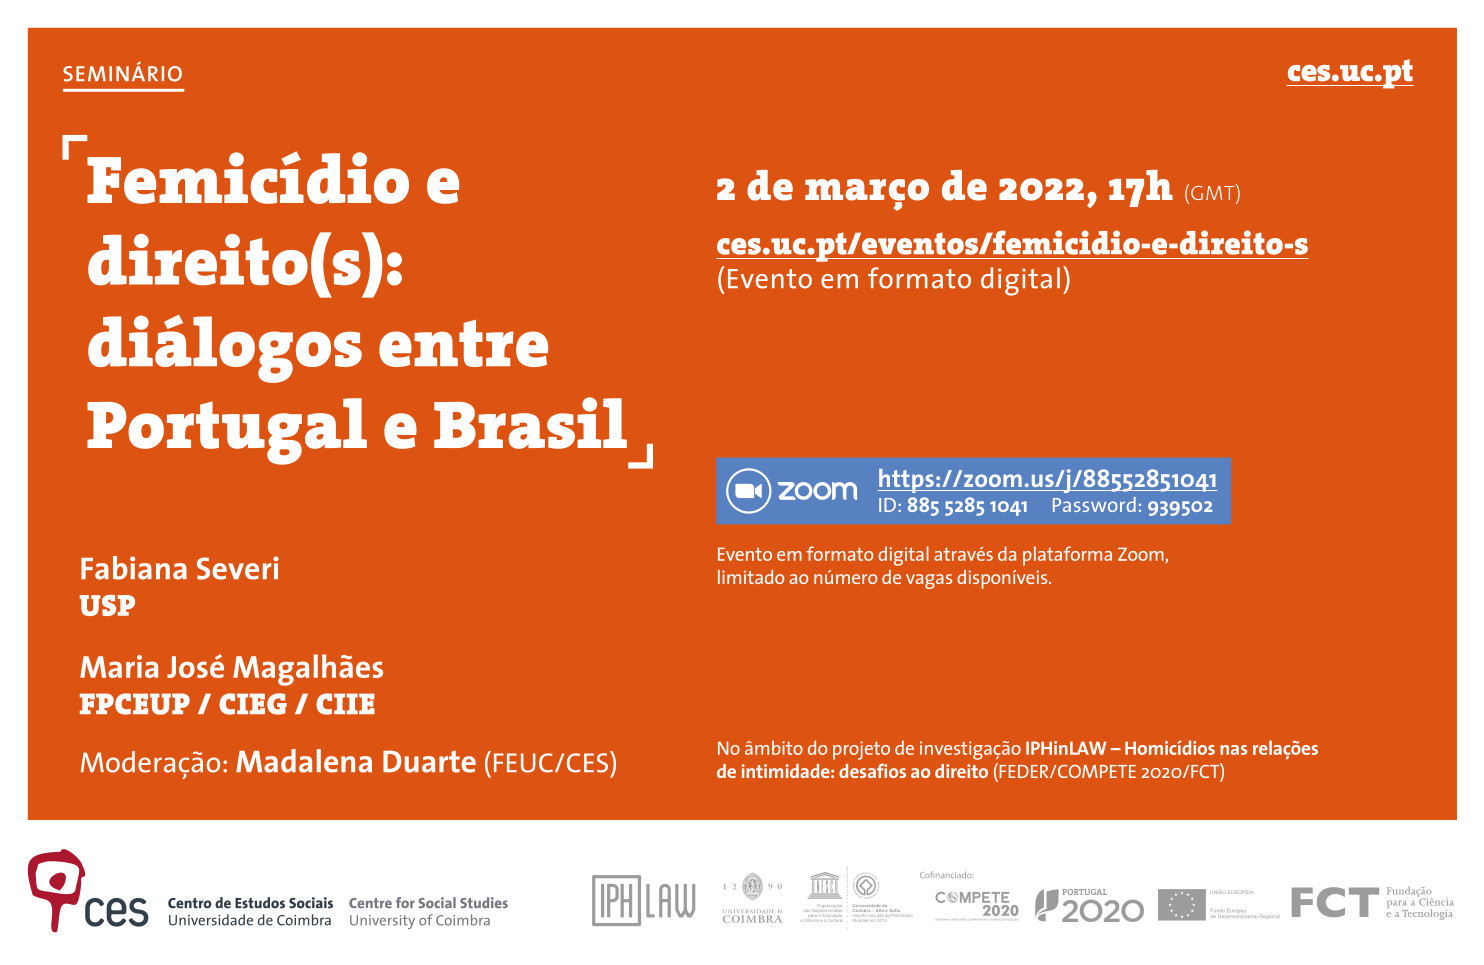 Femicide and law(s): dialogues between Portugal and Brazil<span id="edit_37332"><script>$(function() { $('#edit_37332').load( "/myces/user/editobj.php?tipo=evento&id=37332" ); });</script></span>